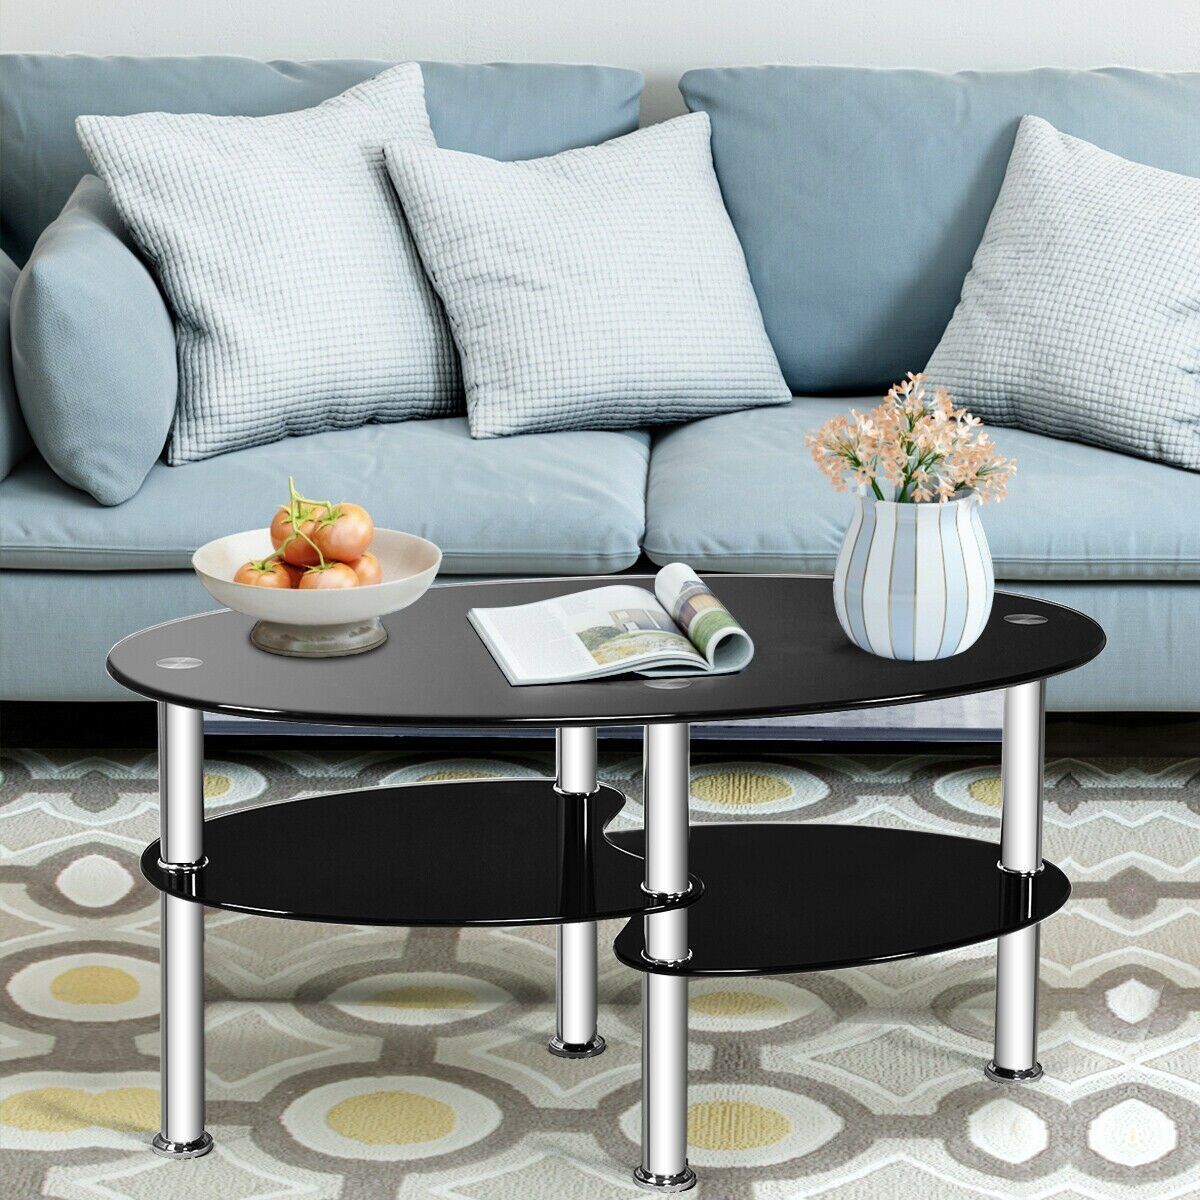 Ivy Bronx Oval Tempered Glass Side Coffee Table | Wayfair Within Tempered Glass Oval Side Tables (View 6 of 15)